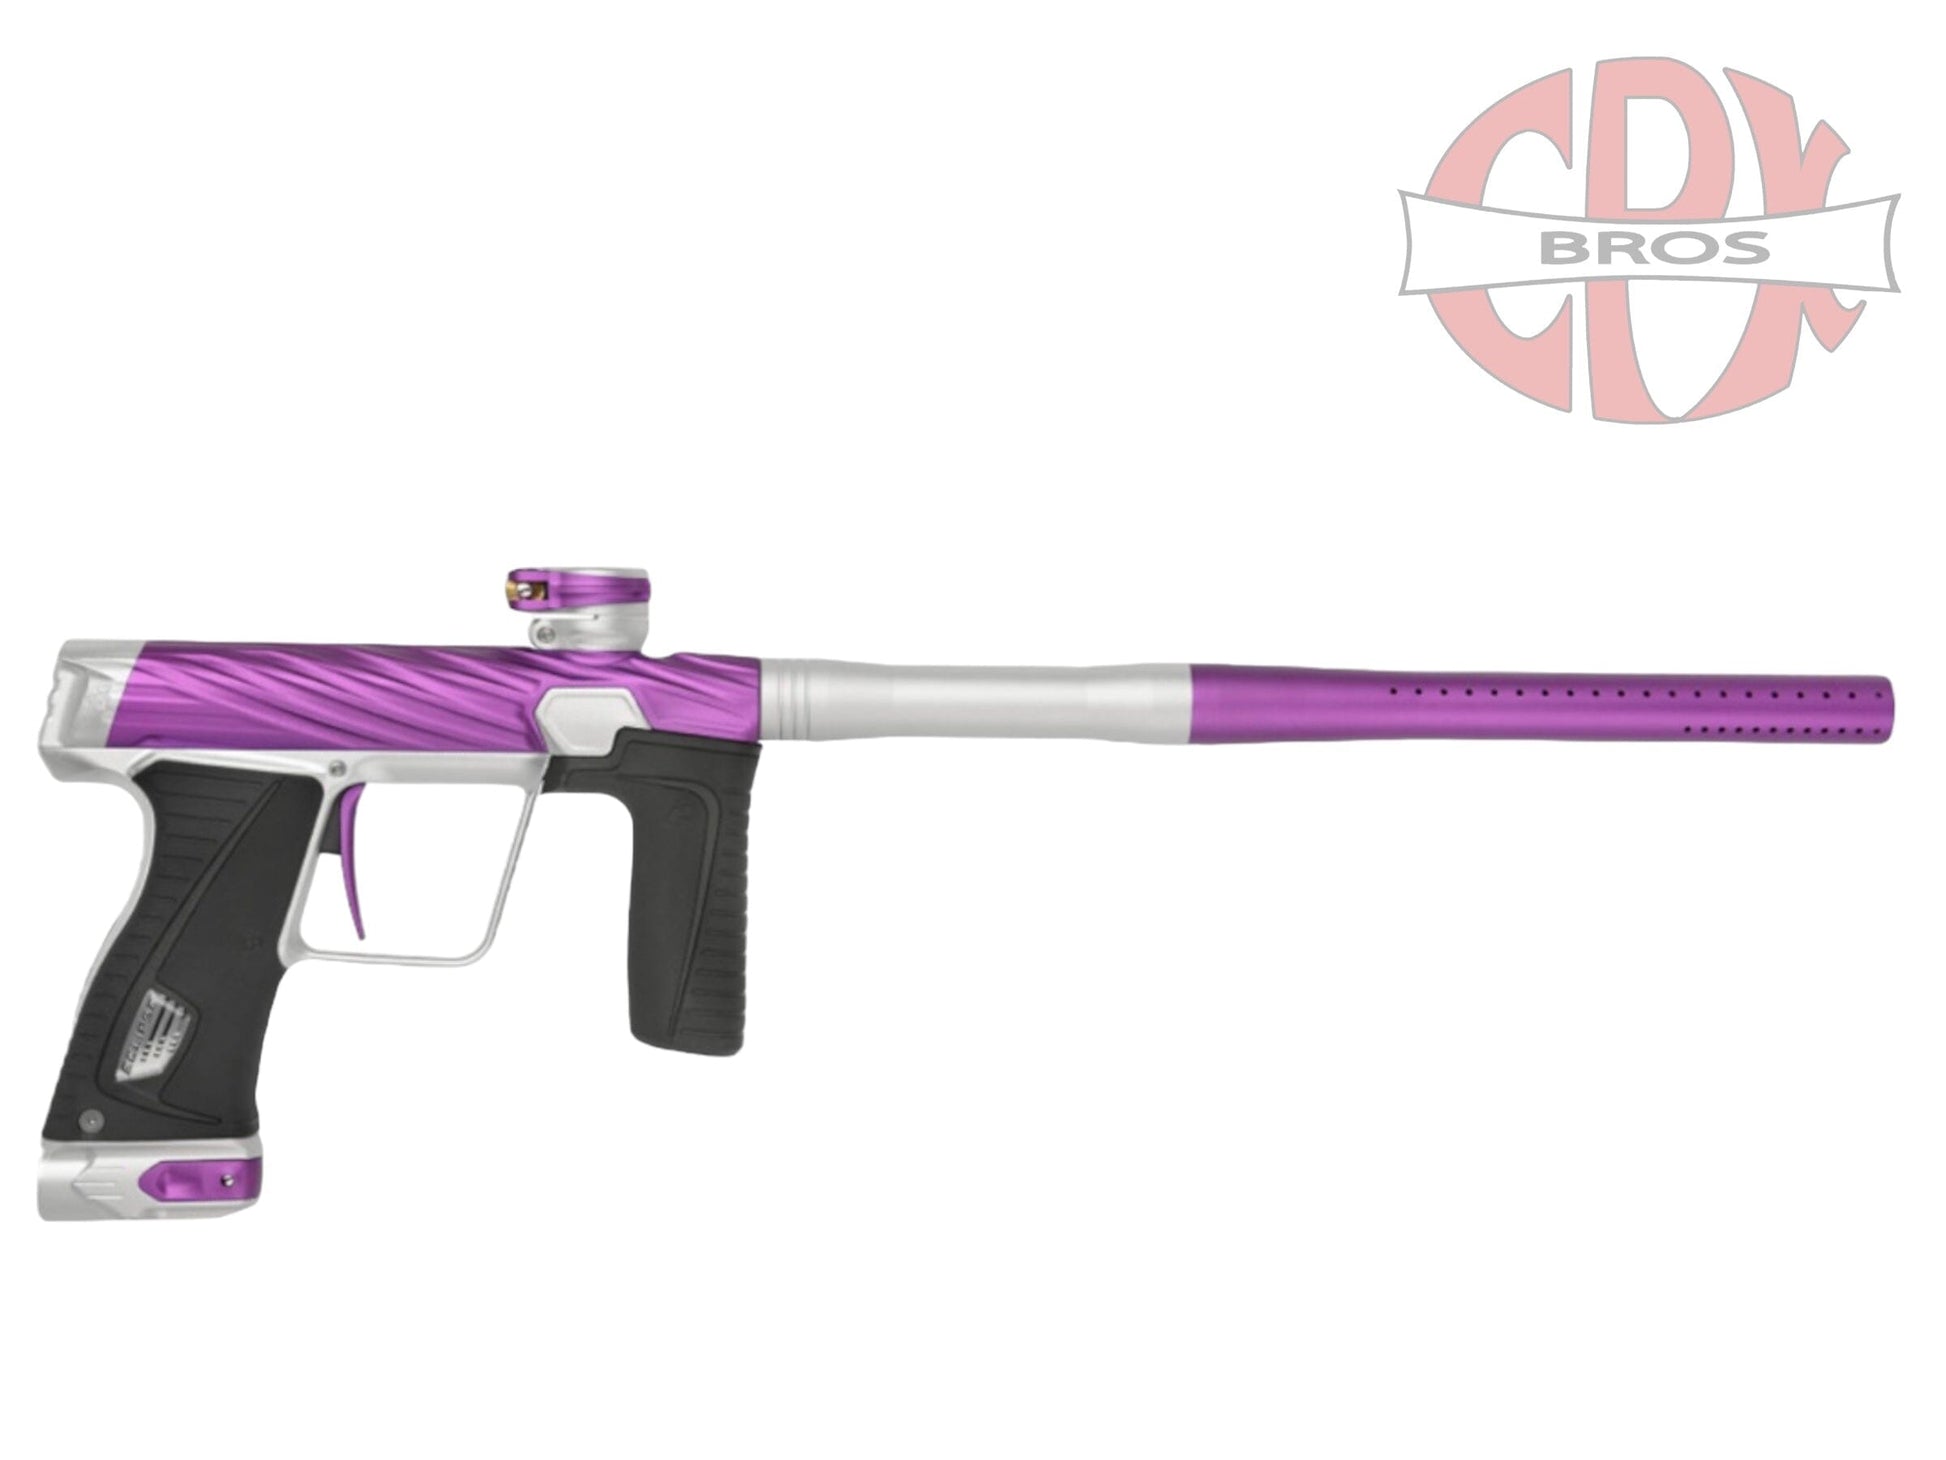 Used HK Army Orbit Gtek 180R- Purple/Silver Paintball Gun from CPXBrosPaintball Buy/Sell/Trade Paintball Markers, New Paintball Guns, Paintball Hoppers, Paintball Masks, and Hormesis Headbands